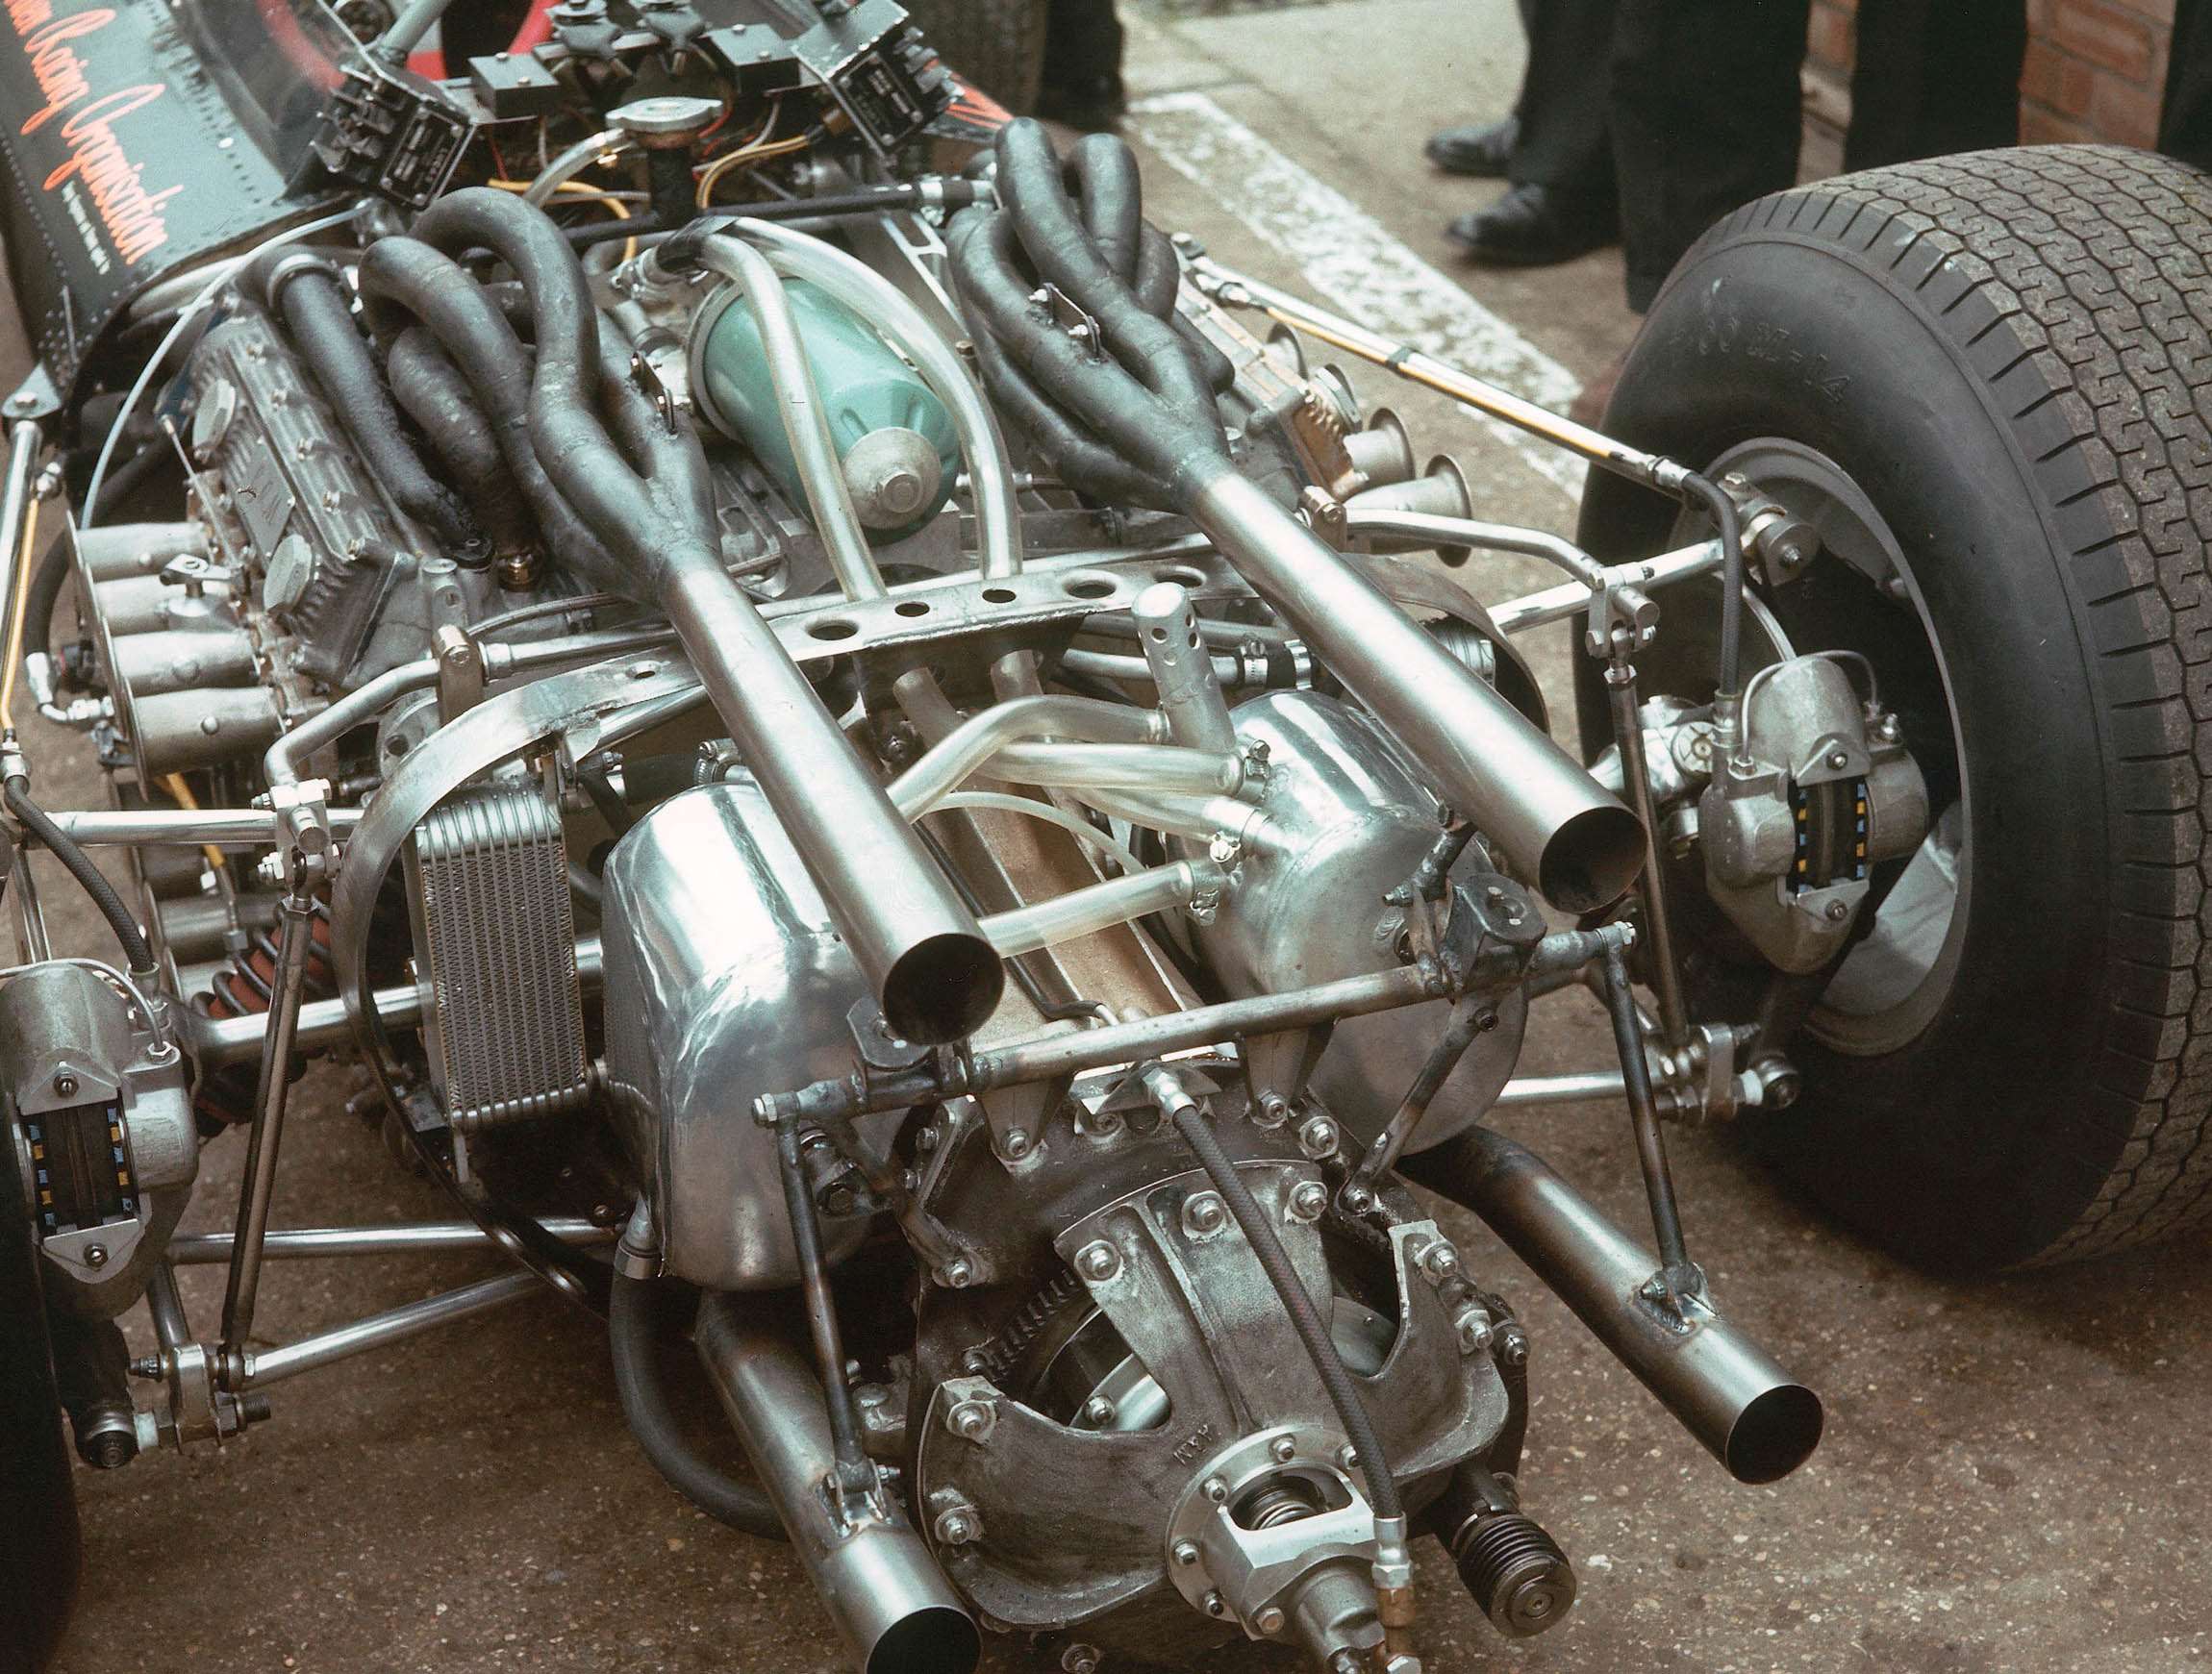 The BRM P75 H16-cylinder 3-litre Formula 1 engine in its P83 works team chassis